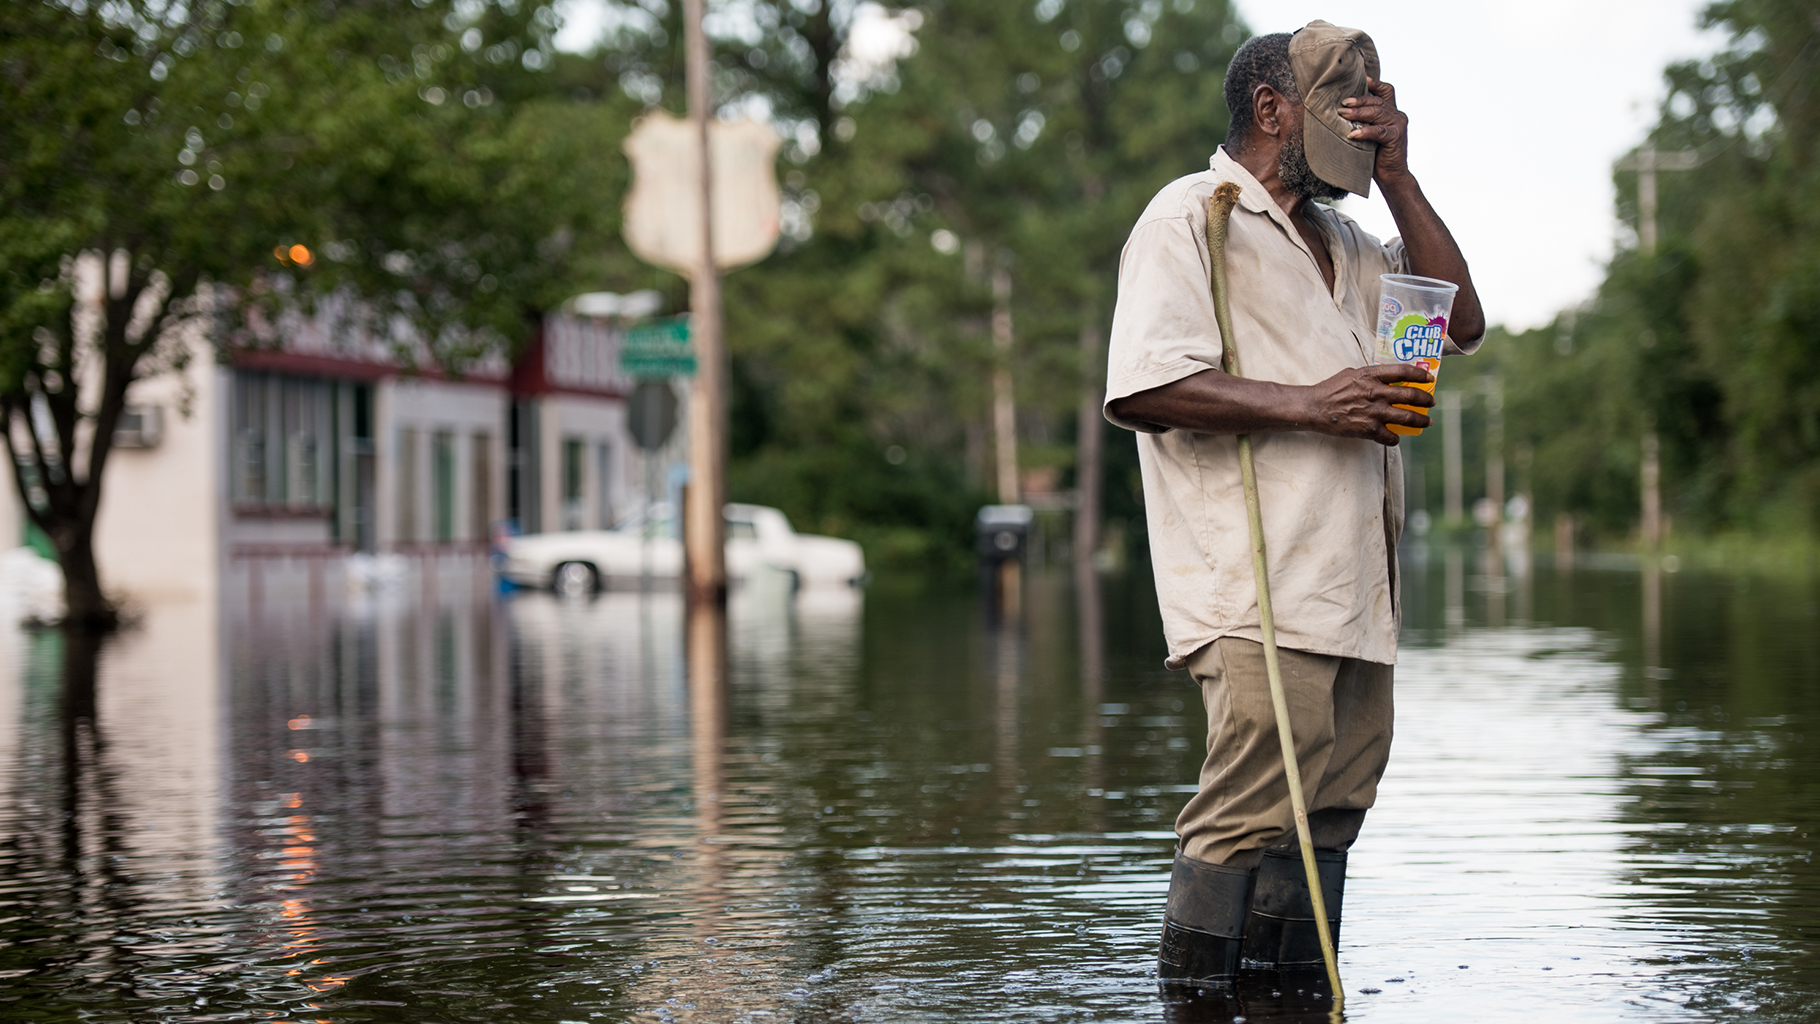 A man stands in Waccamaw River floodwaters in Bucksport, South Carolina, which was slammed by Hurricane Florence in the fall of 2018